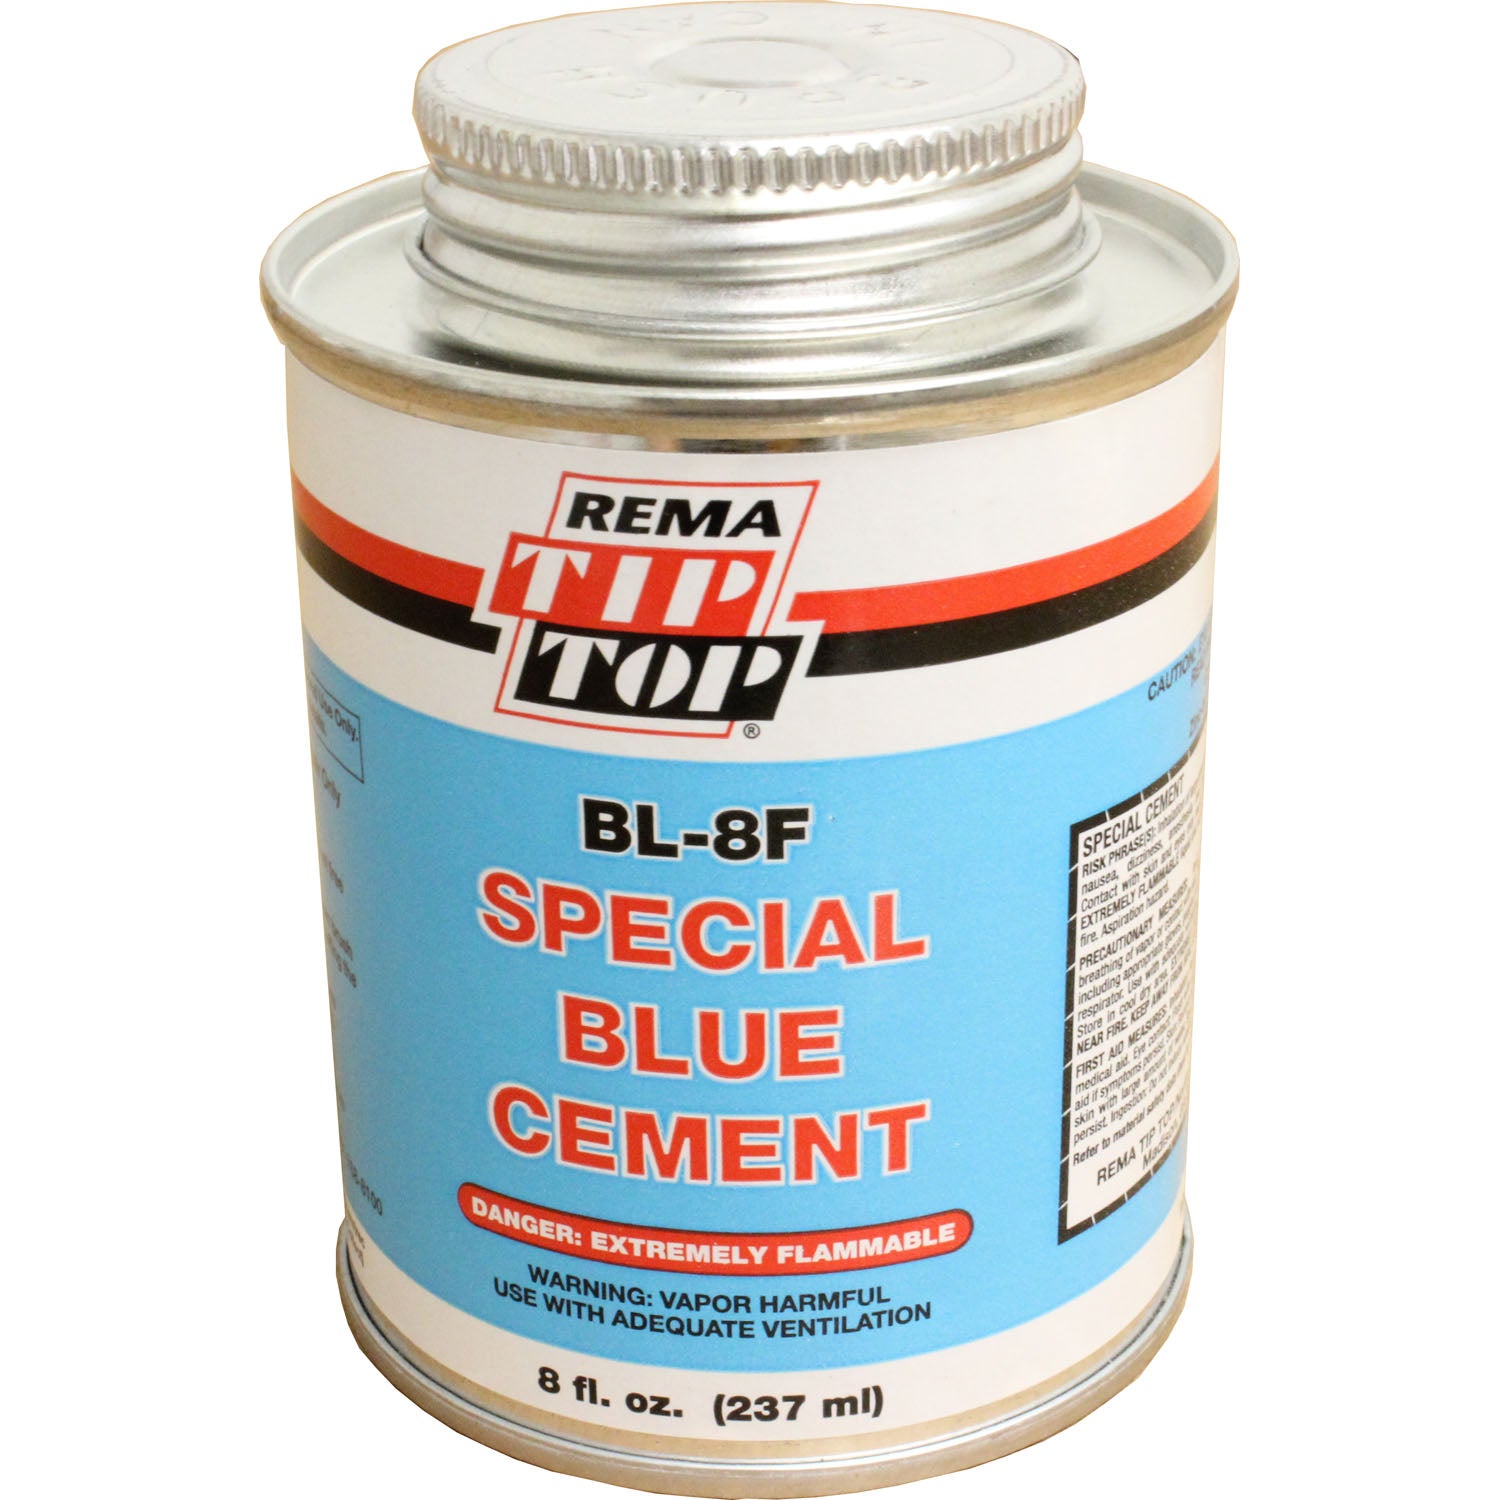 REMA TIP TOP BL-8F Special Blue Cement 8oz